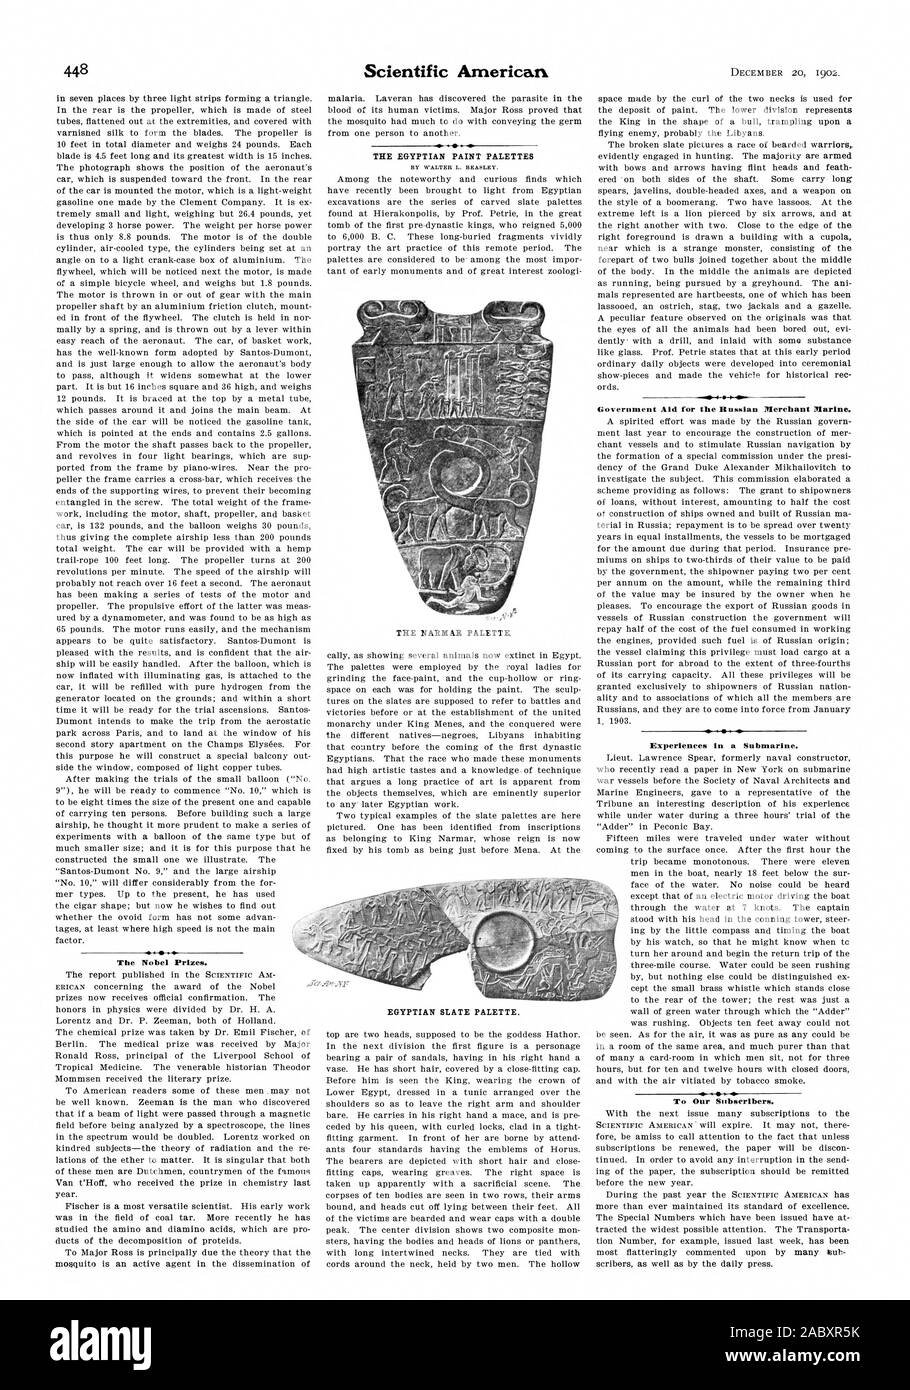 The Nobel Prizes. THE EGYPTIAN PAINT PALETTES THE NARMAR PALETTE I I  Government Aid for the Russian Merchant Marine. Experiences in a Submarine. To Our Subscribers. EGYPTIAN SLATE PALETTE., scientific american, 1902-12-20 Stock Photo